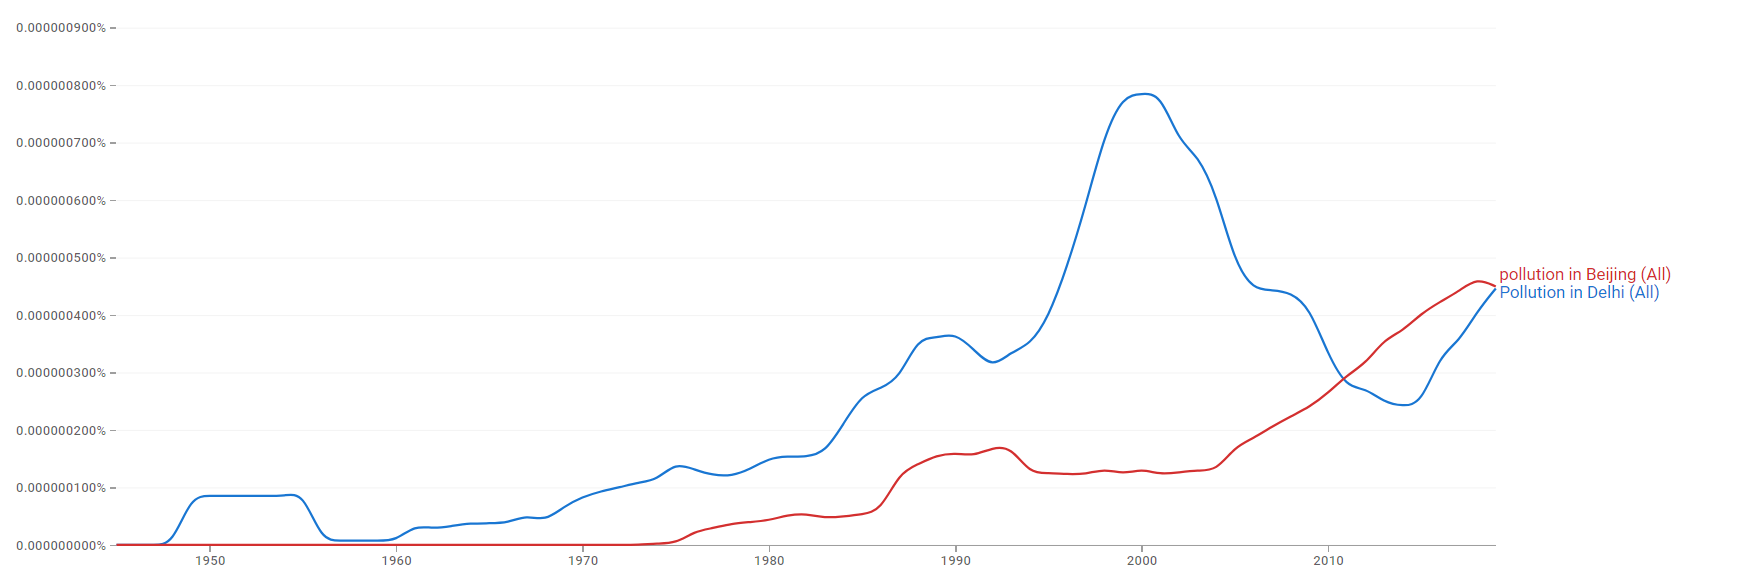 Pollution in Delhi and pollution in Beijing ngram.png